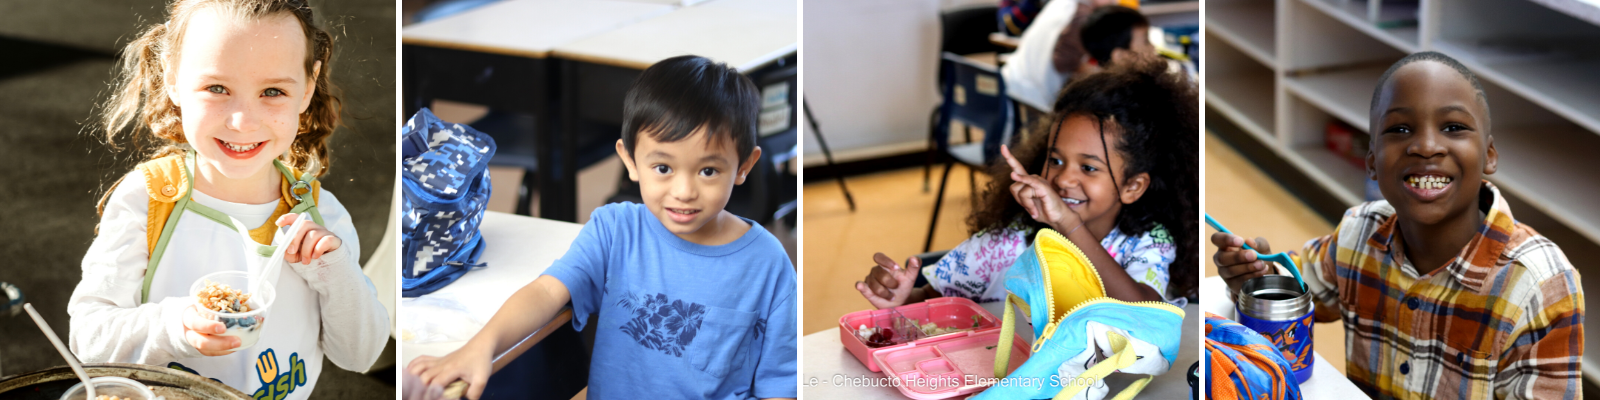 Various photos of smiling students participating in breakfast or lunch programs at schools